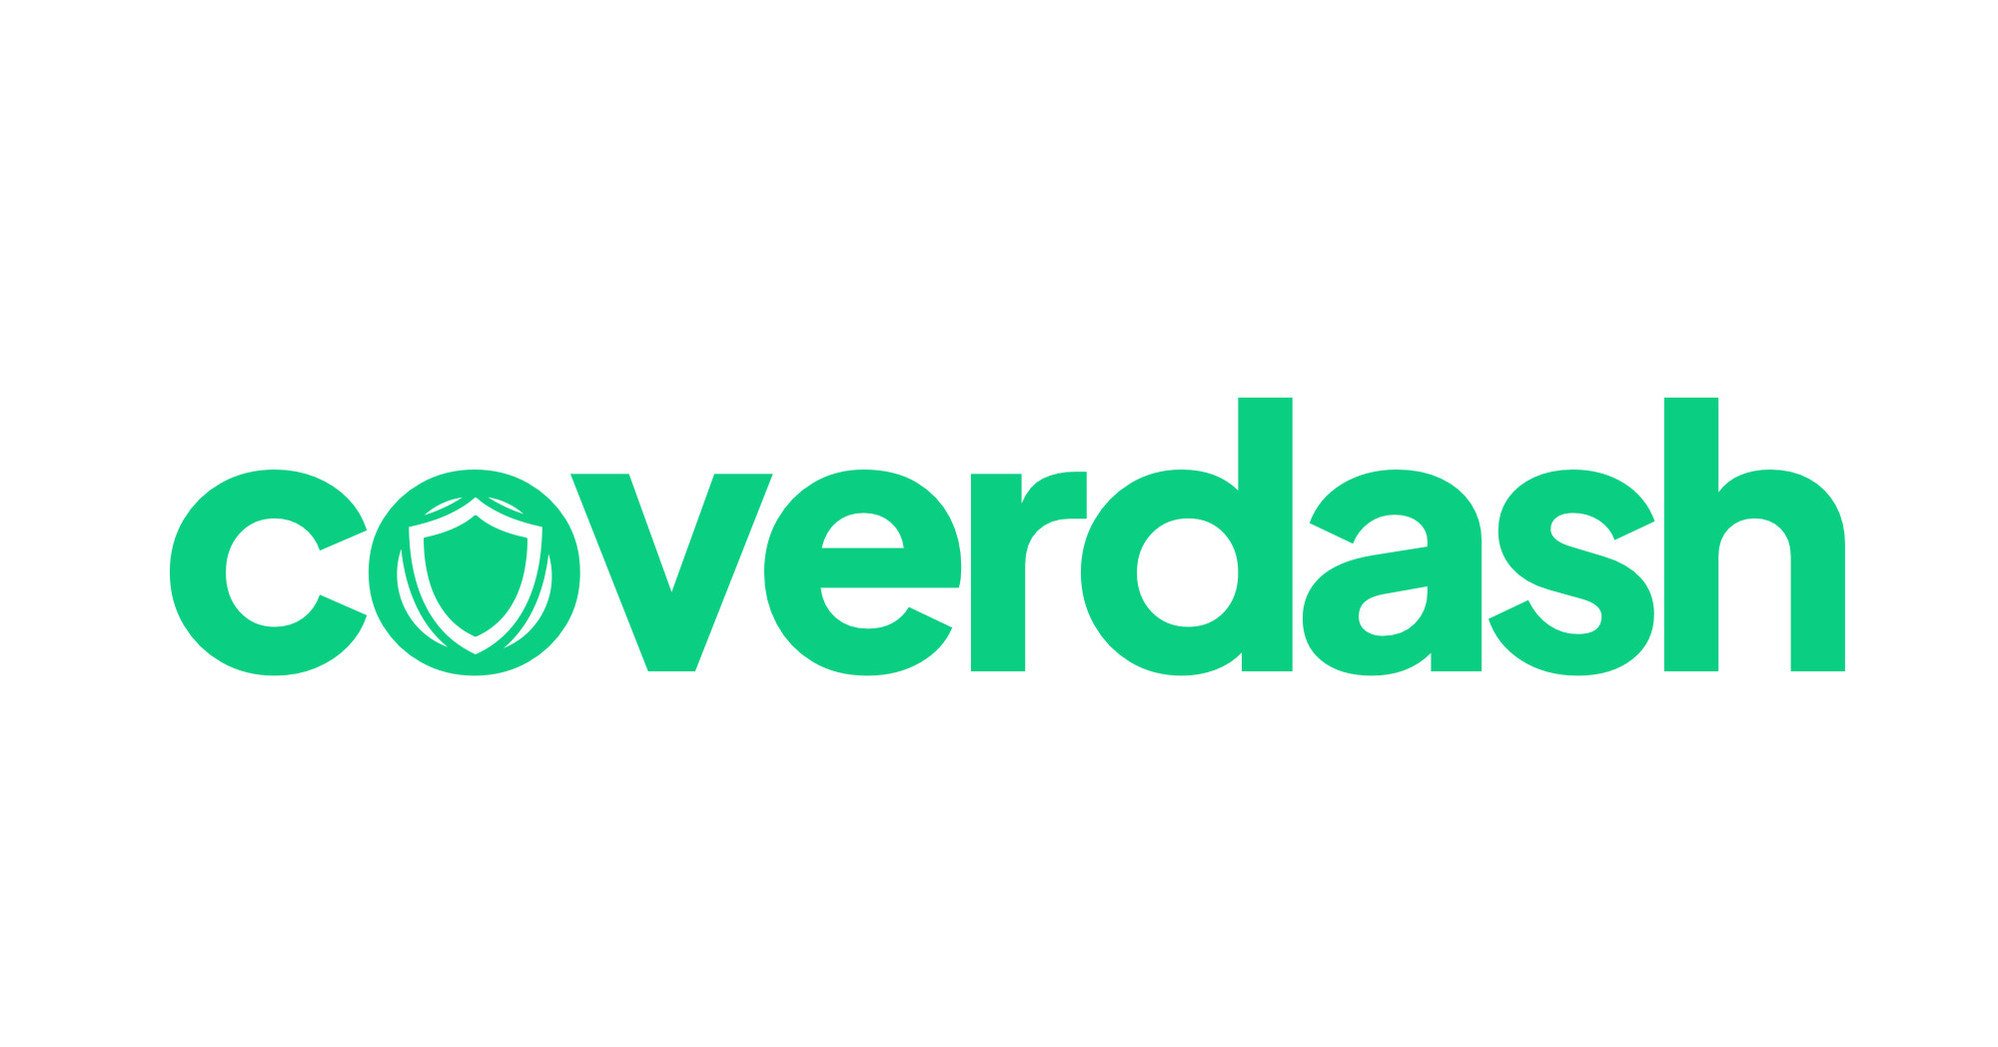 Coverdash Revolutionizes Small Business Insurance With Embedded Distribution Partners